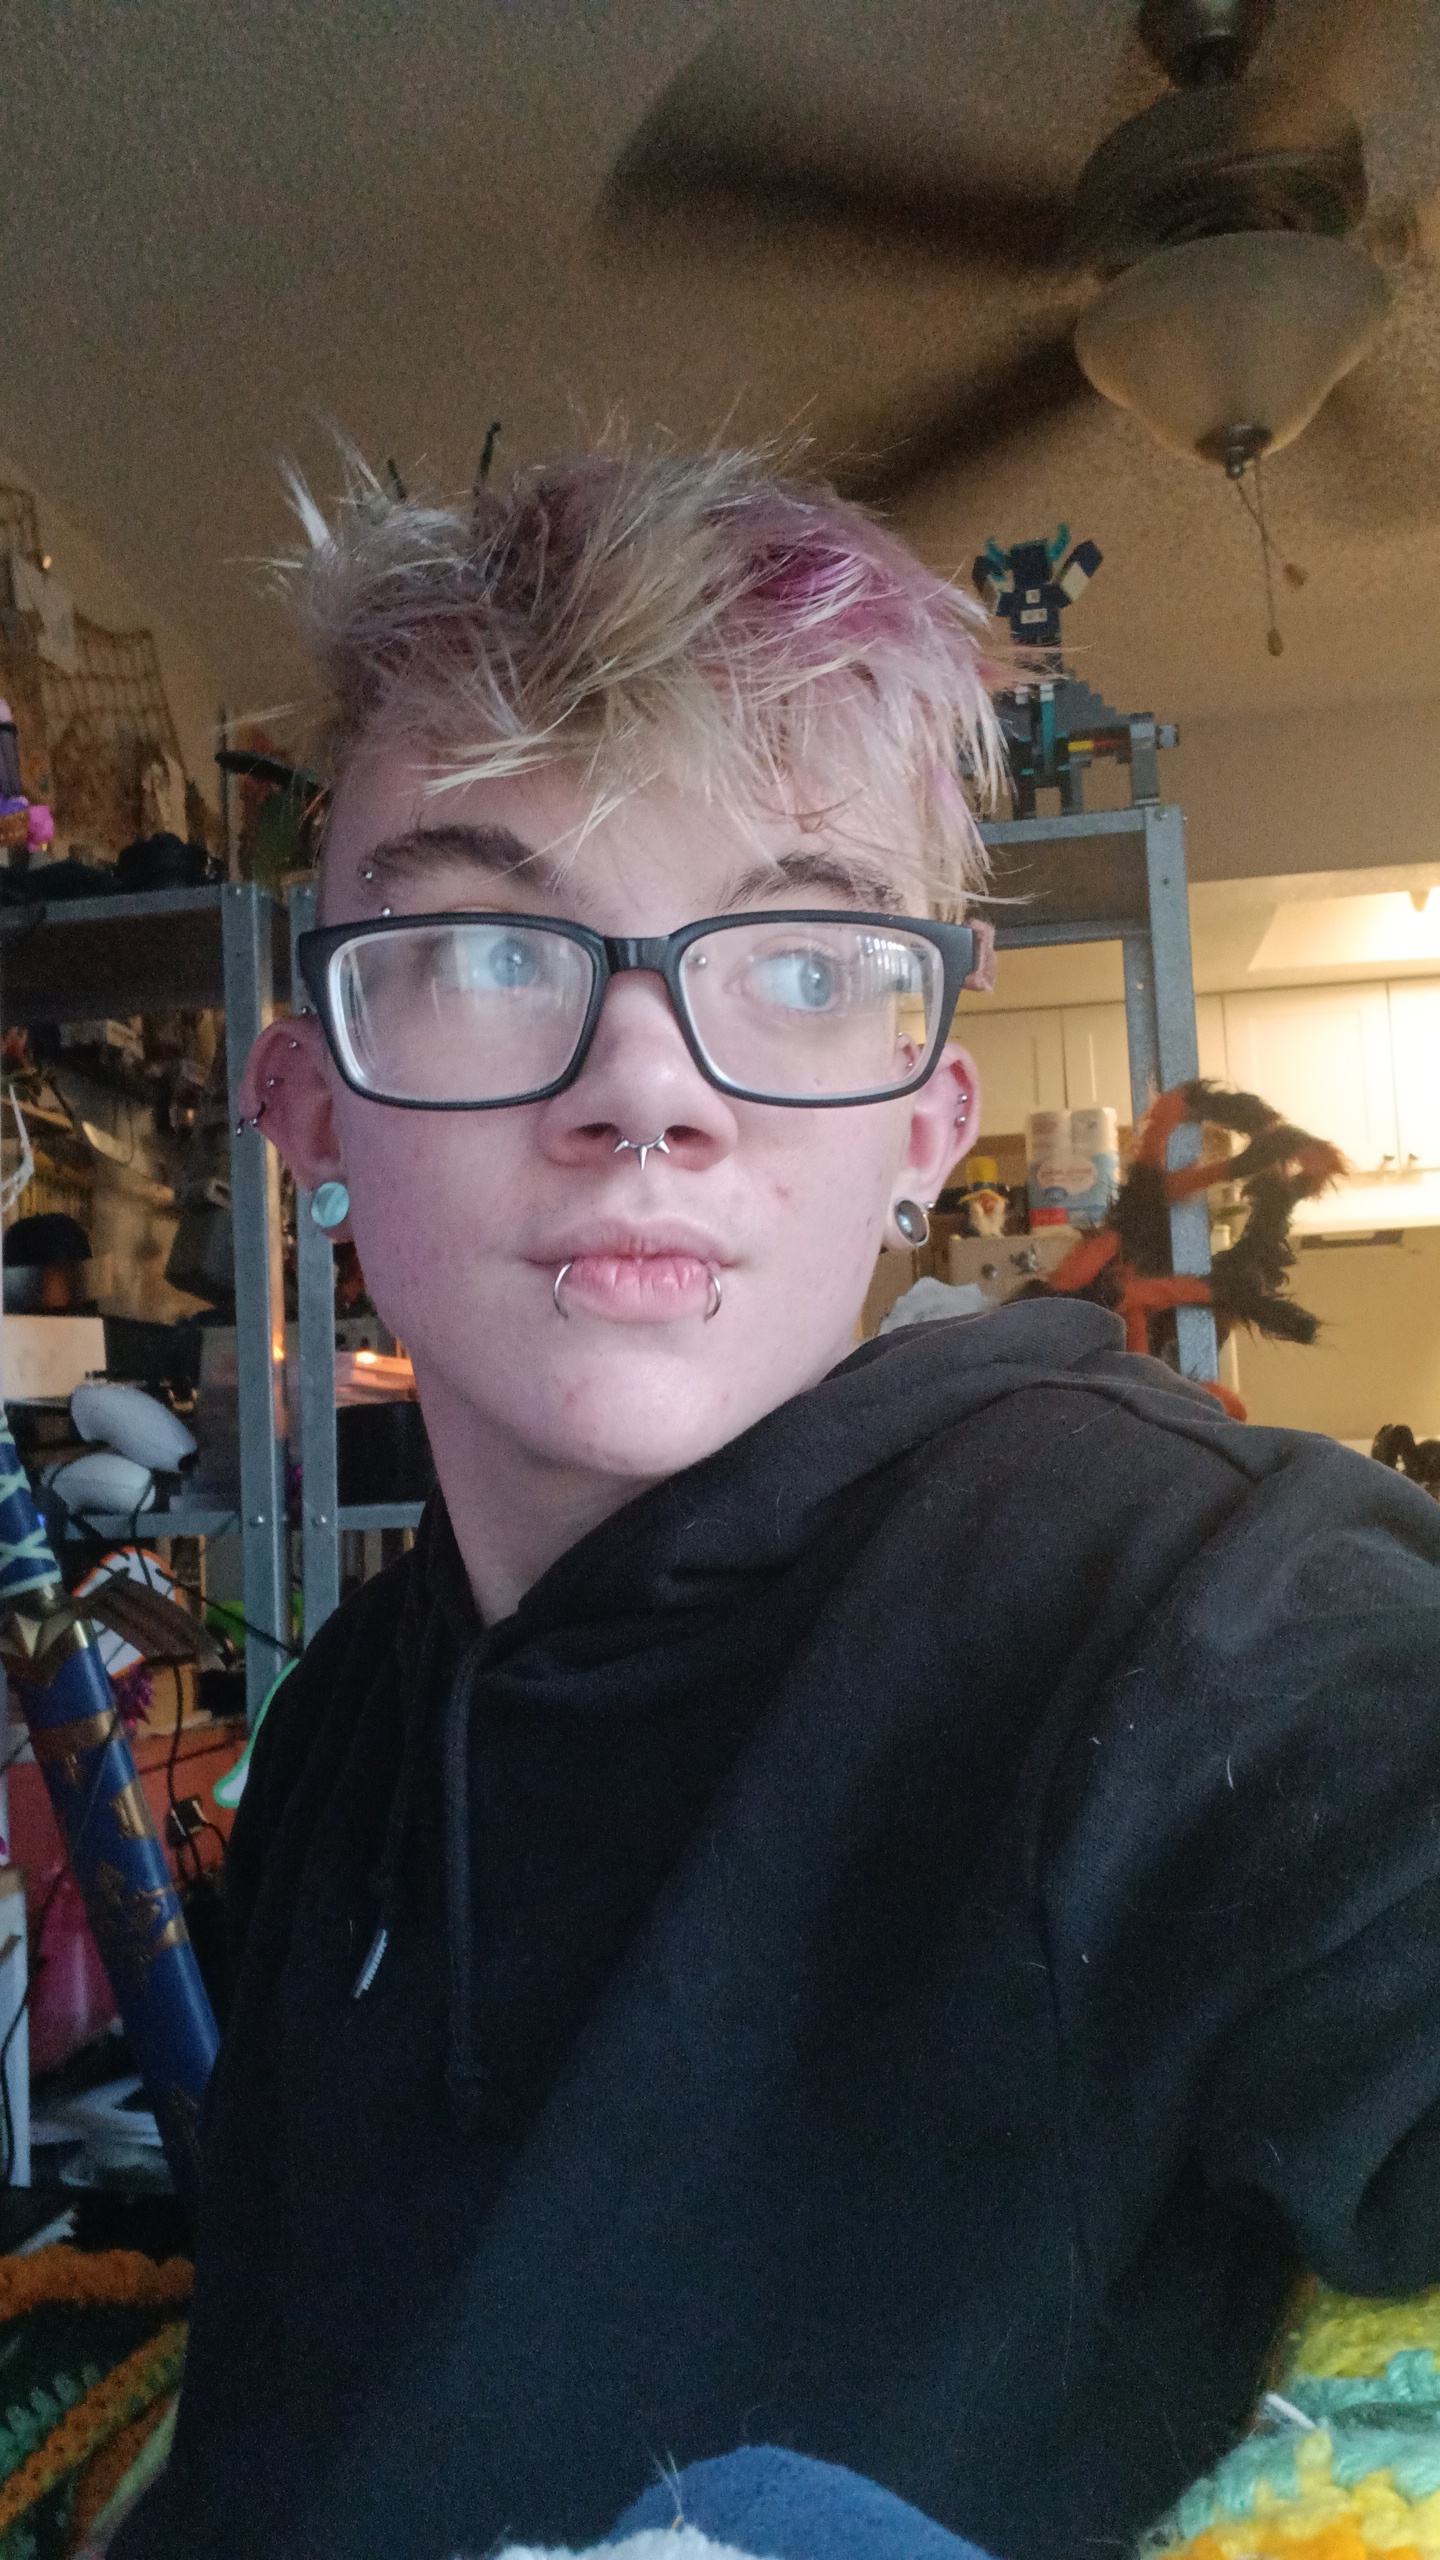 Photo of Maxx Gastelum, a young adult with dissheveled blonde hair with a streak of faded pink in it. amaxx is wewaring glasses, has multiple facial piercings, and is wearing a black top.